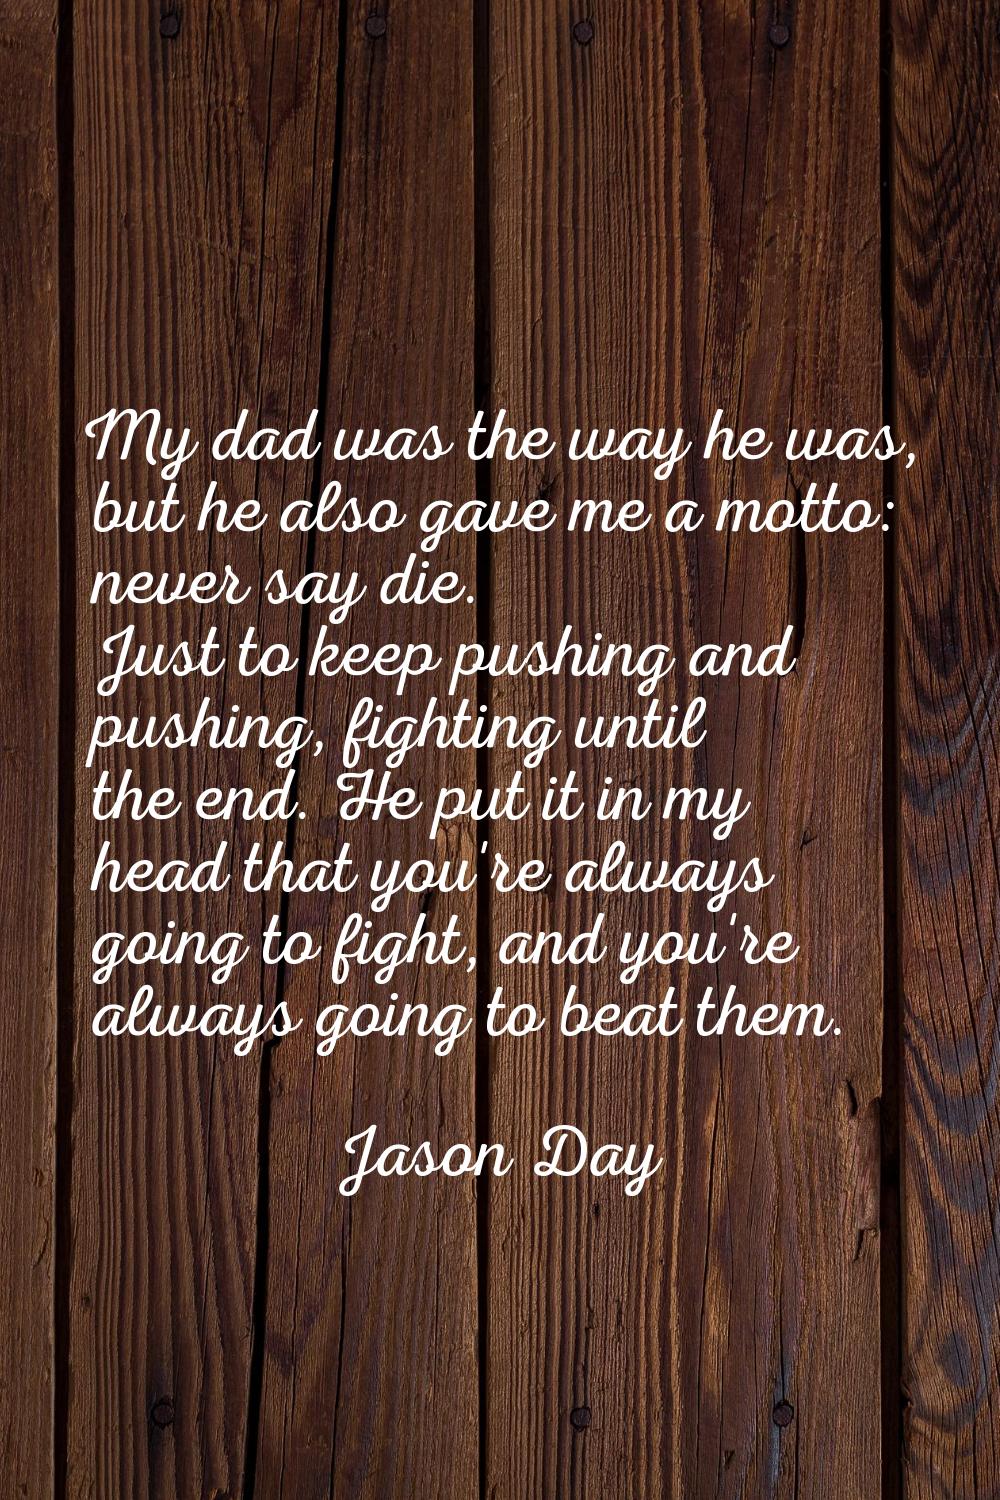 My dad was the way he was, but he also gave me a motto: never say die. Just to keep pushing and pus